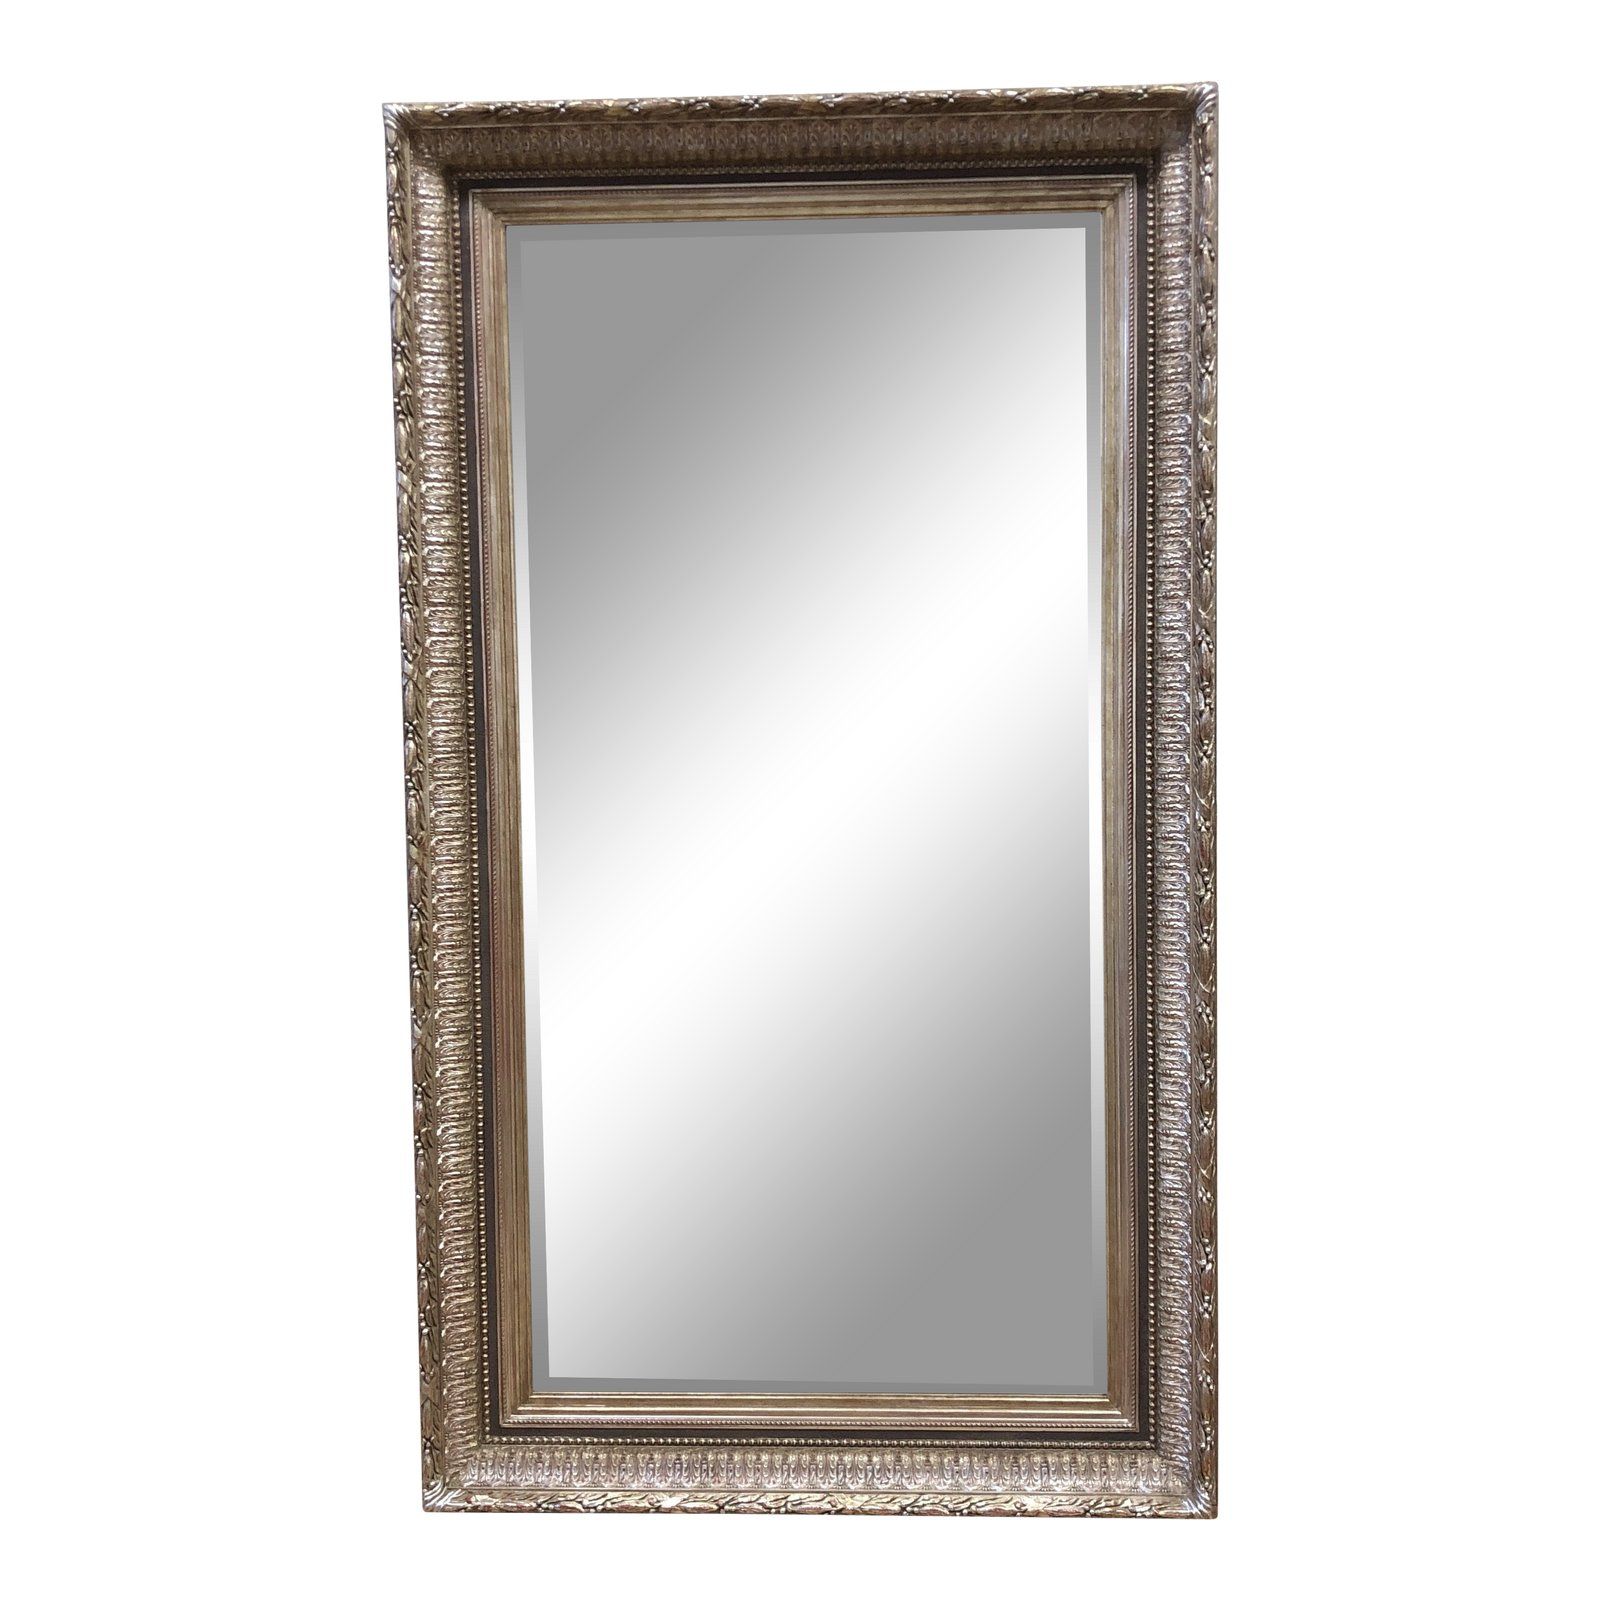 Silver Leaf Large Ornate Framed Beveled Mirror | Design Plus Gallery In Silver Beveled Wall Mirrors (View 13 of 15)